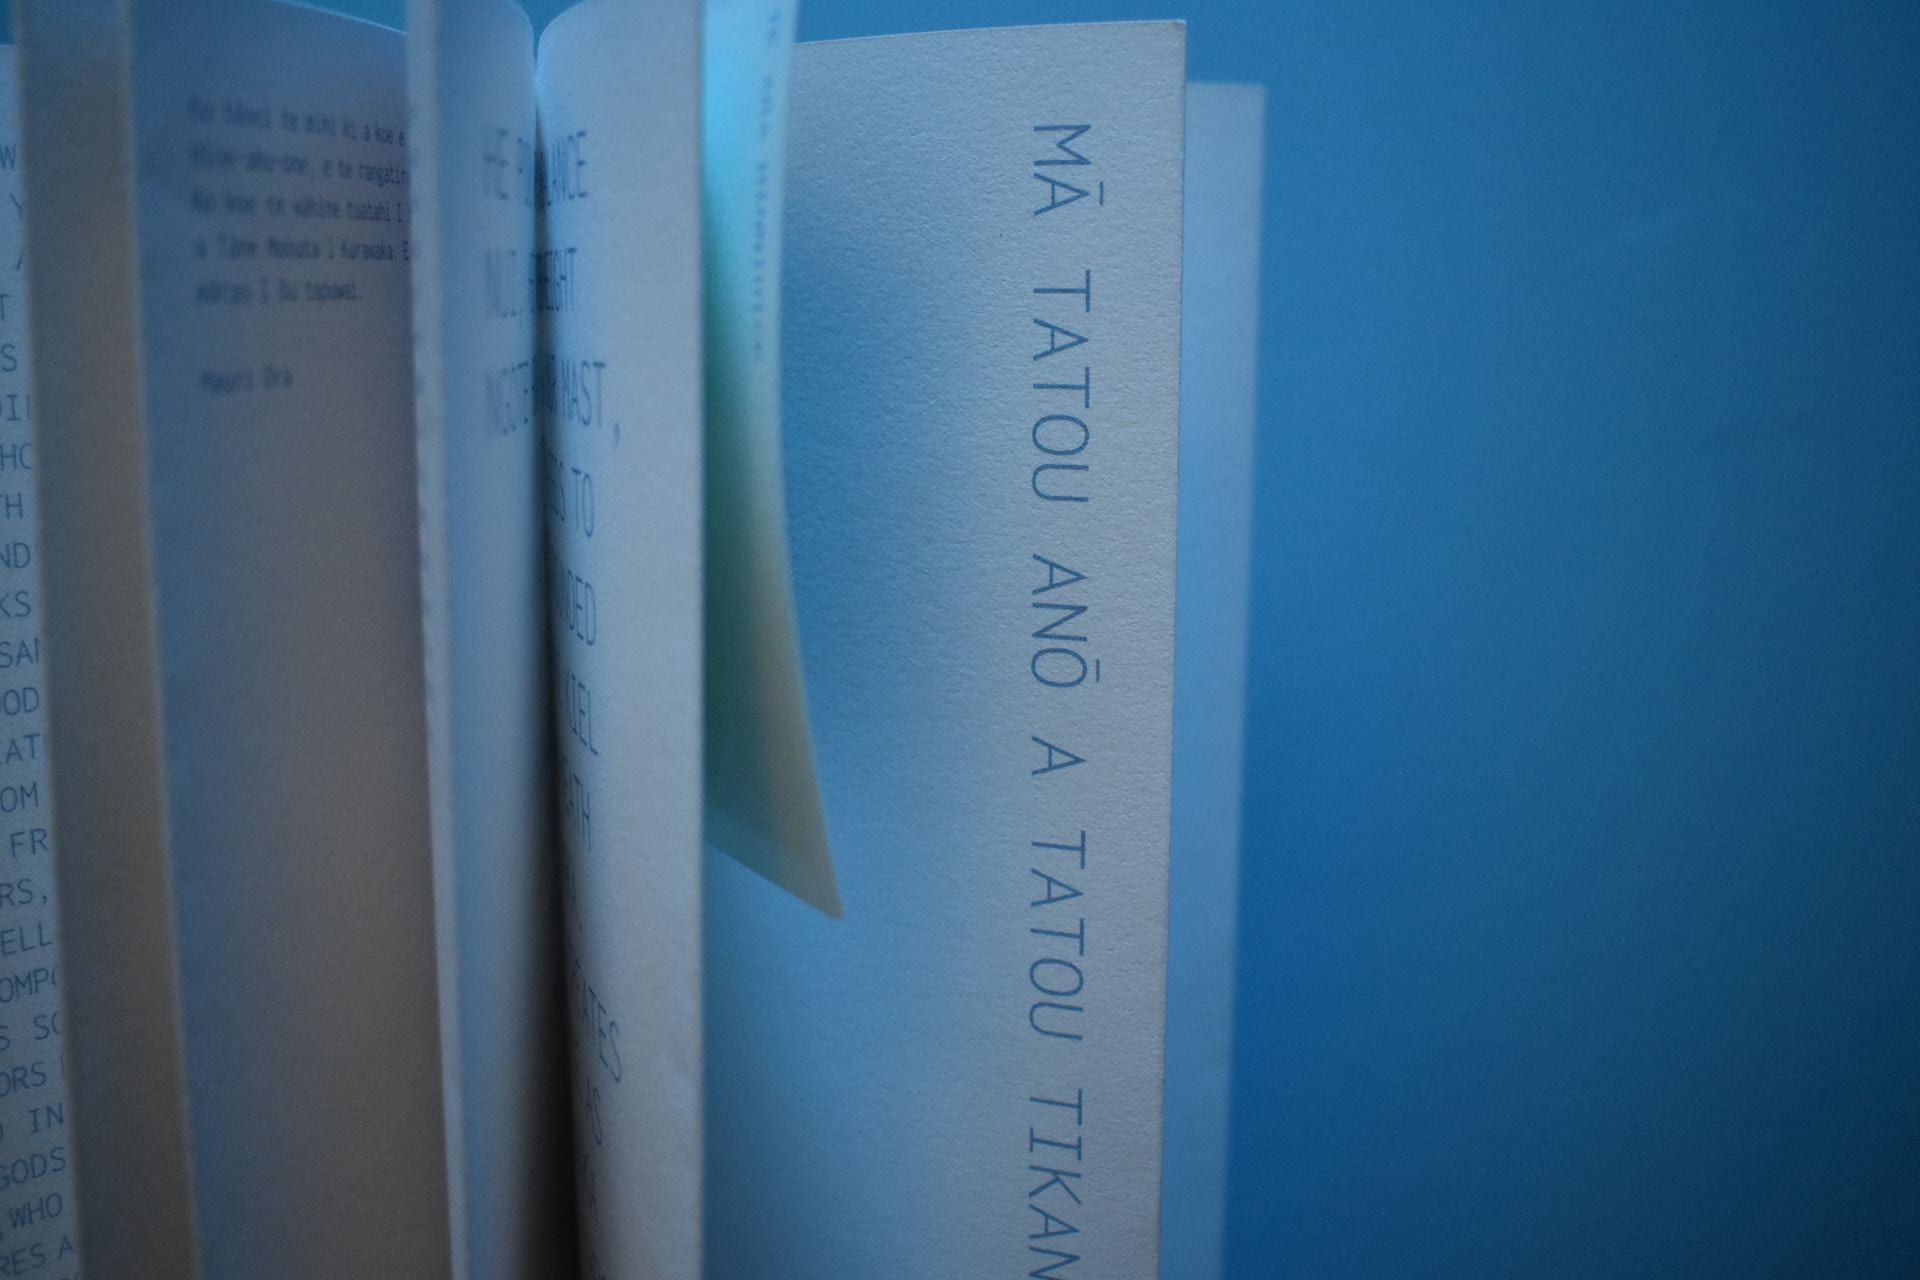 Close-up of text in a spiral-bound book.